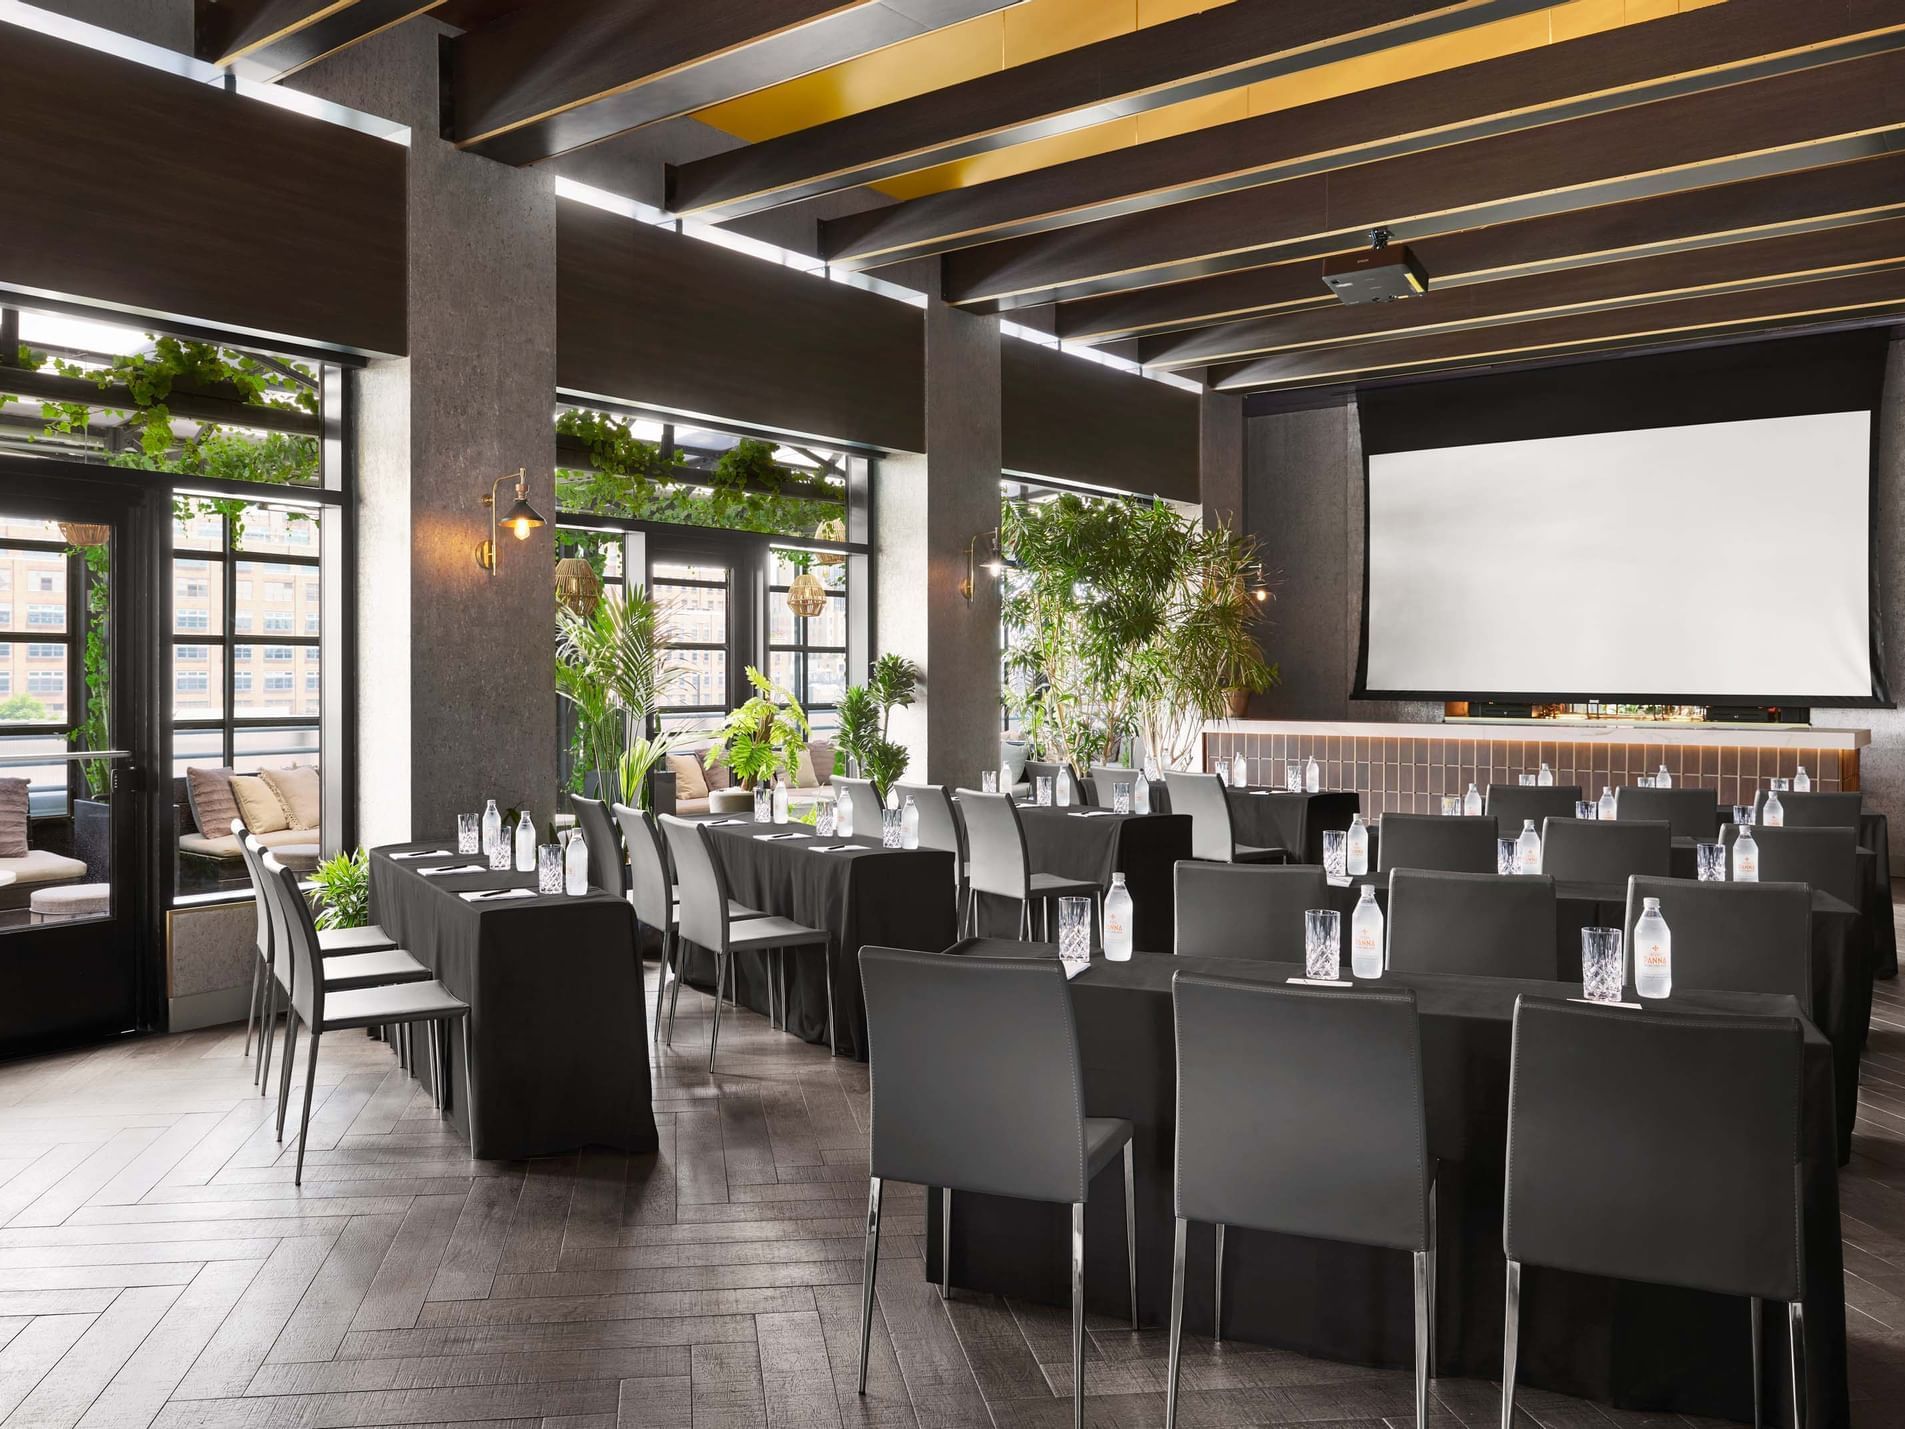 Theater style meeting setup at Gansevoort Meatpacking NYC